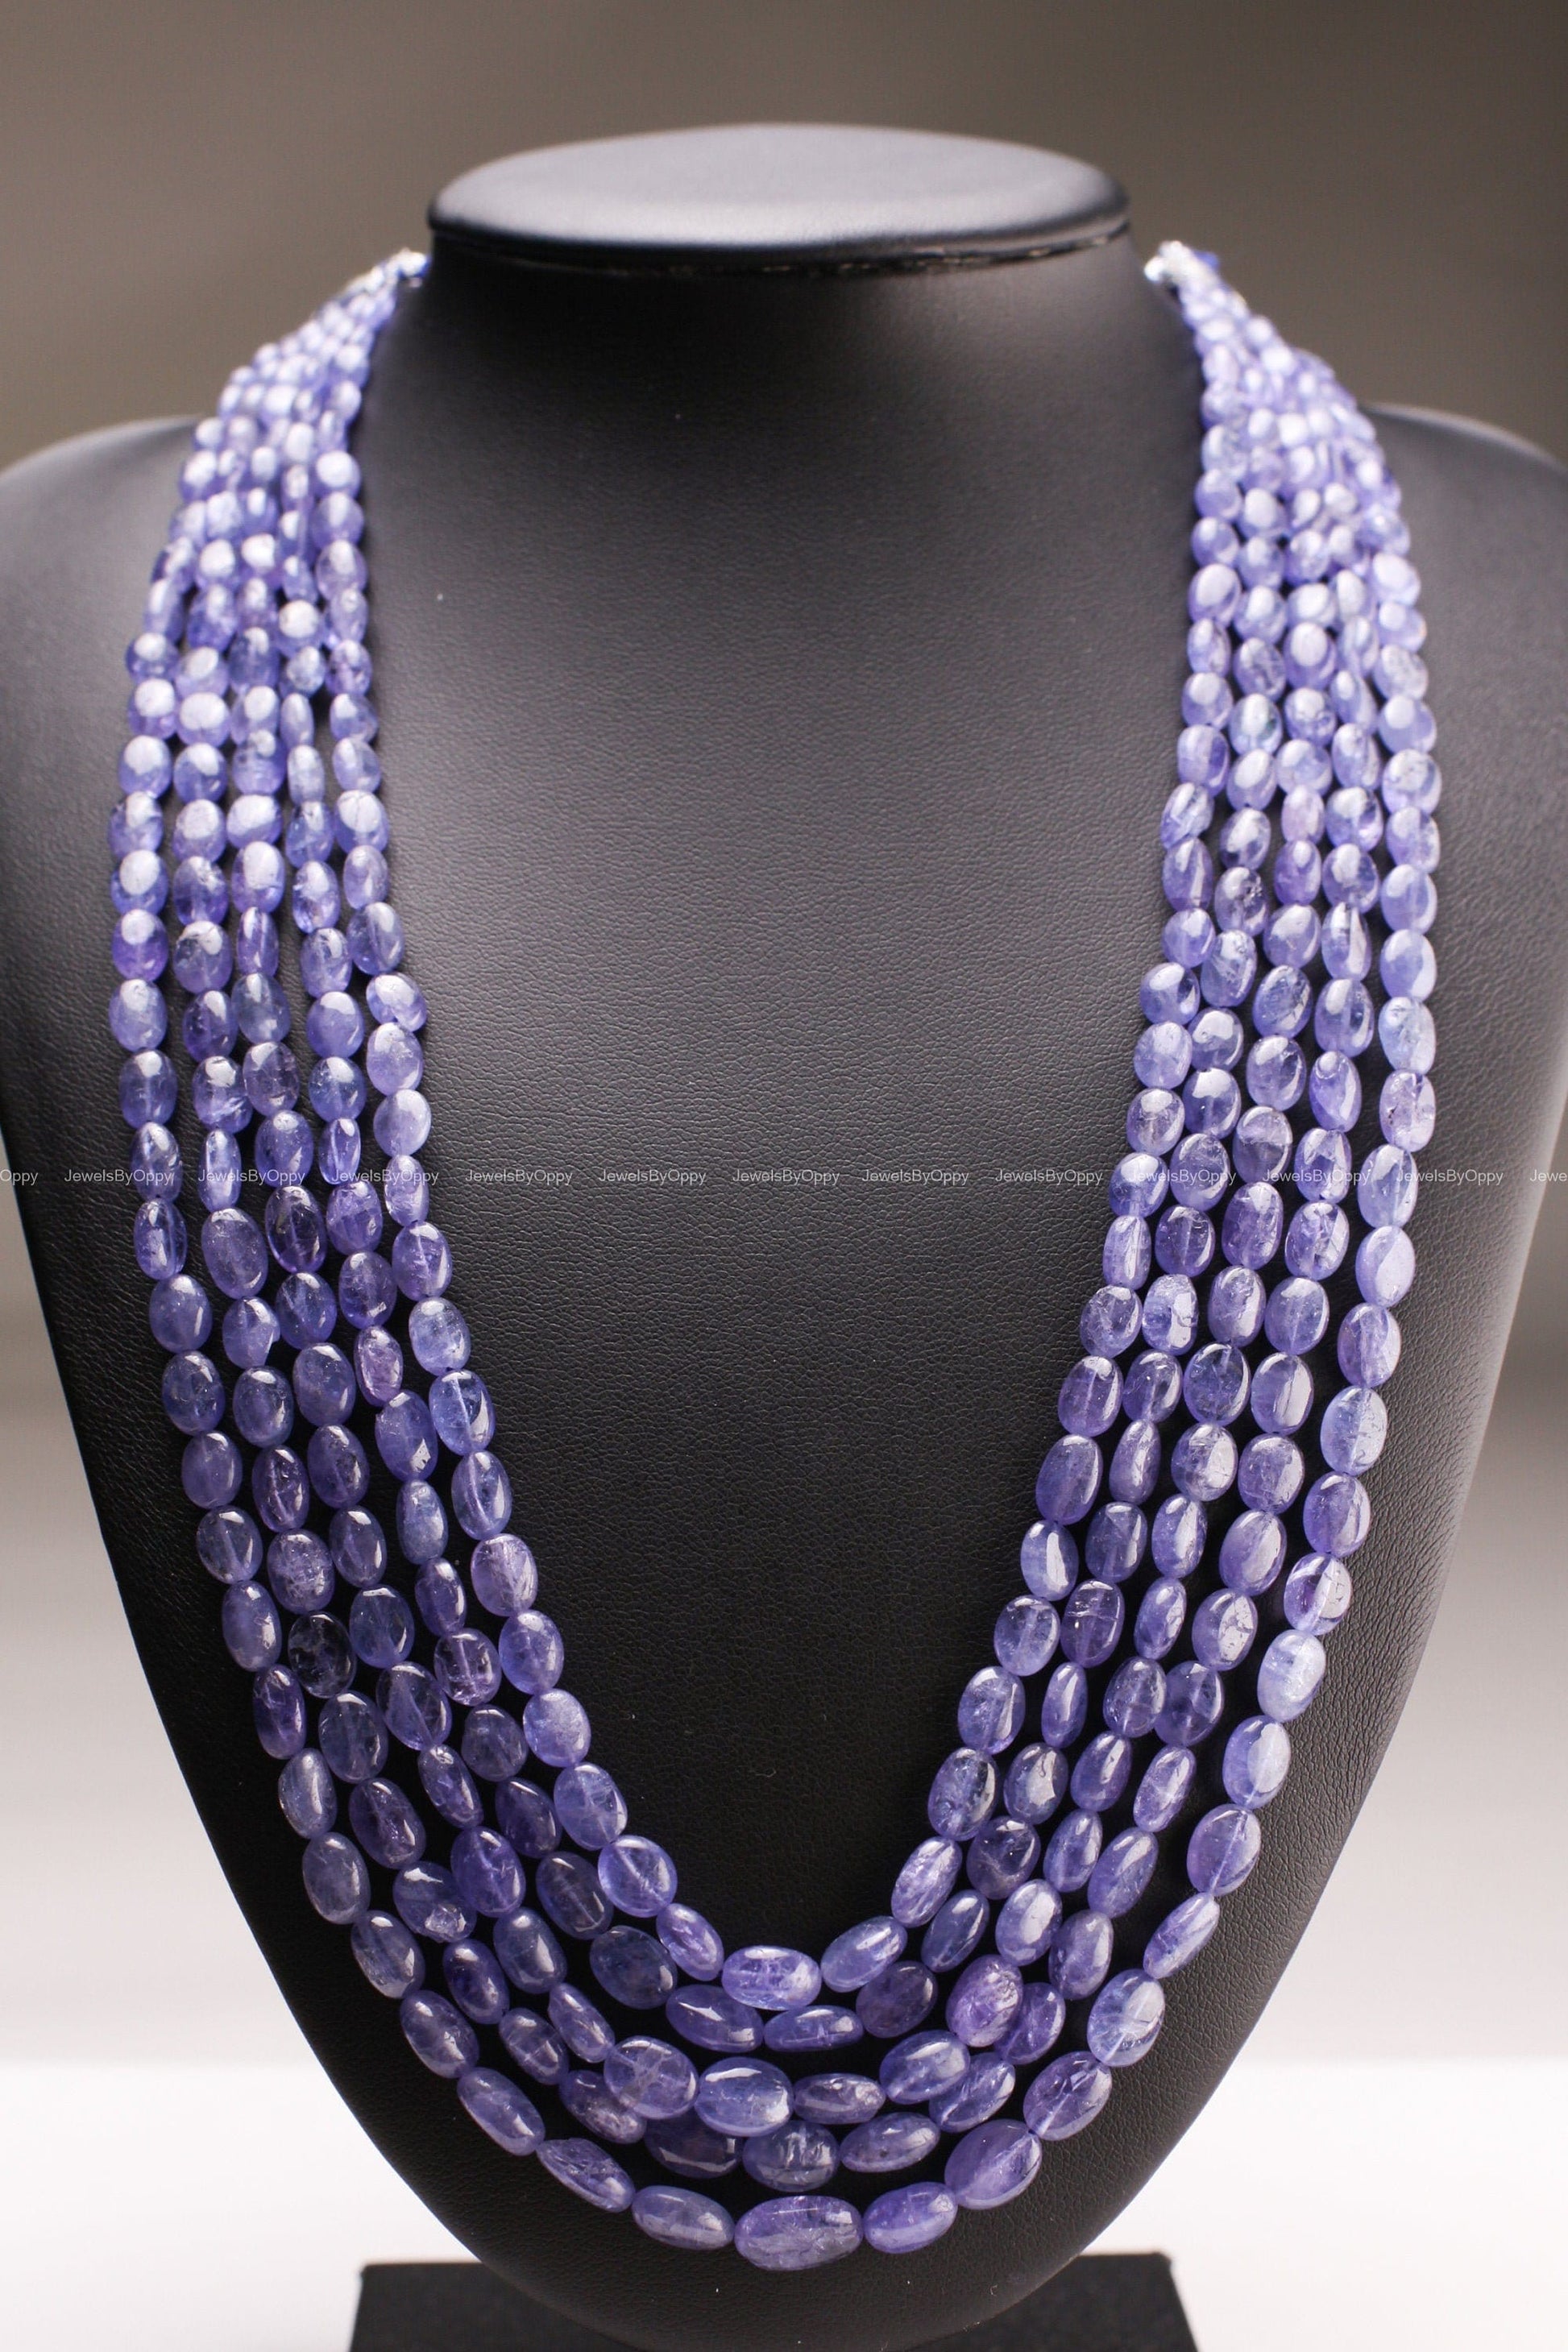 3, 5 line Tanzanite Smooth Oval 7-10mm Necklace,16&quot; -18”AAA quality natural Tanzanite oval bead with long adjustable Thread to 30&quot;